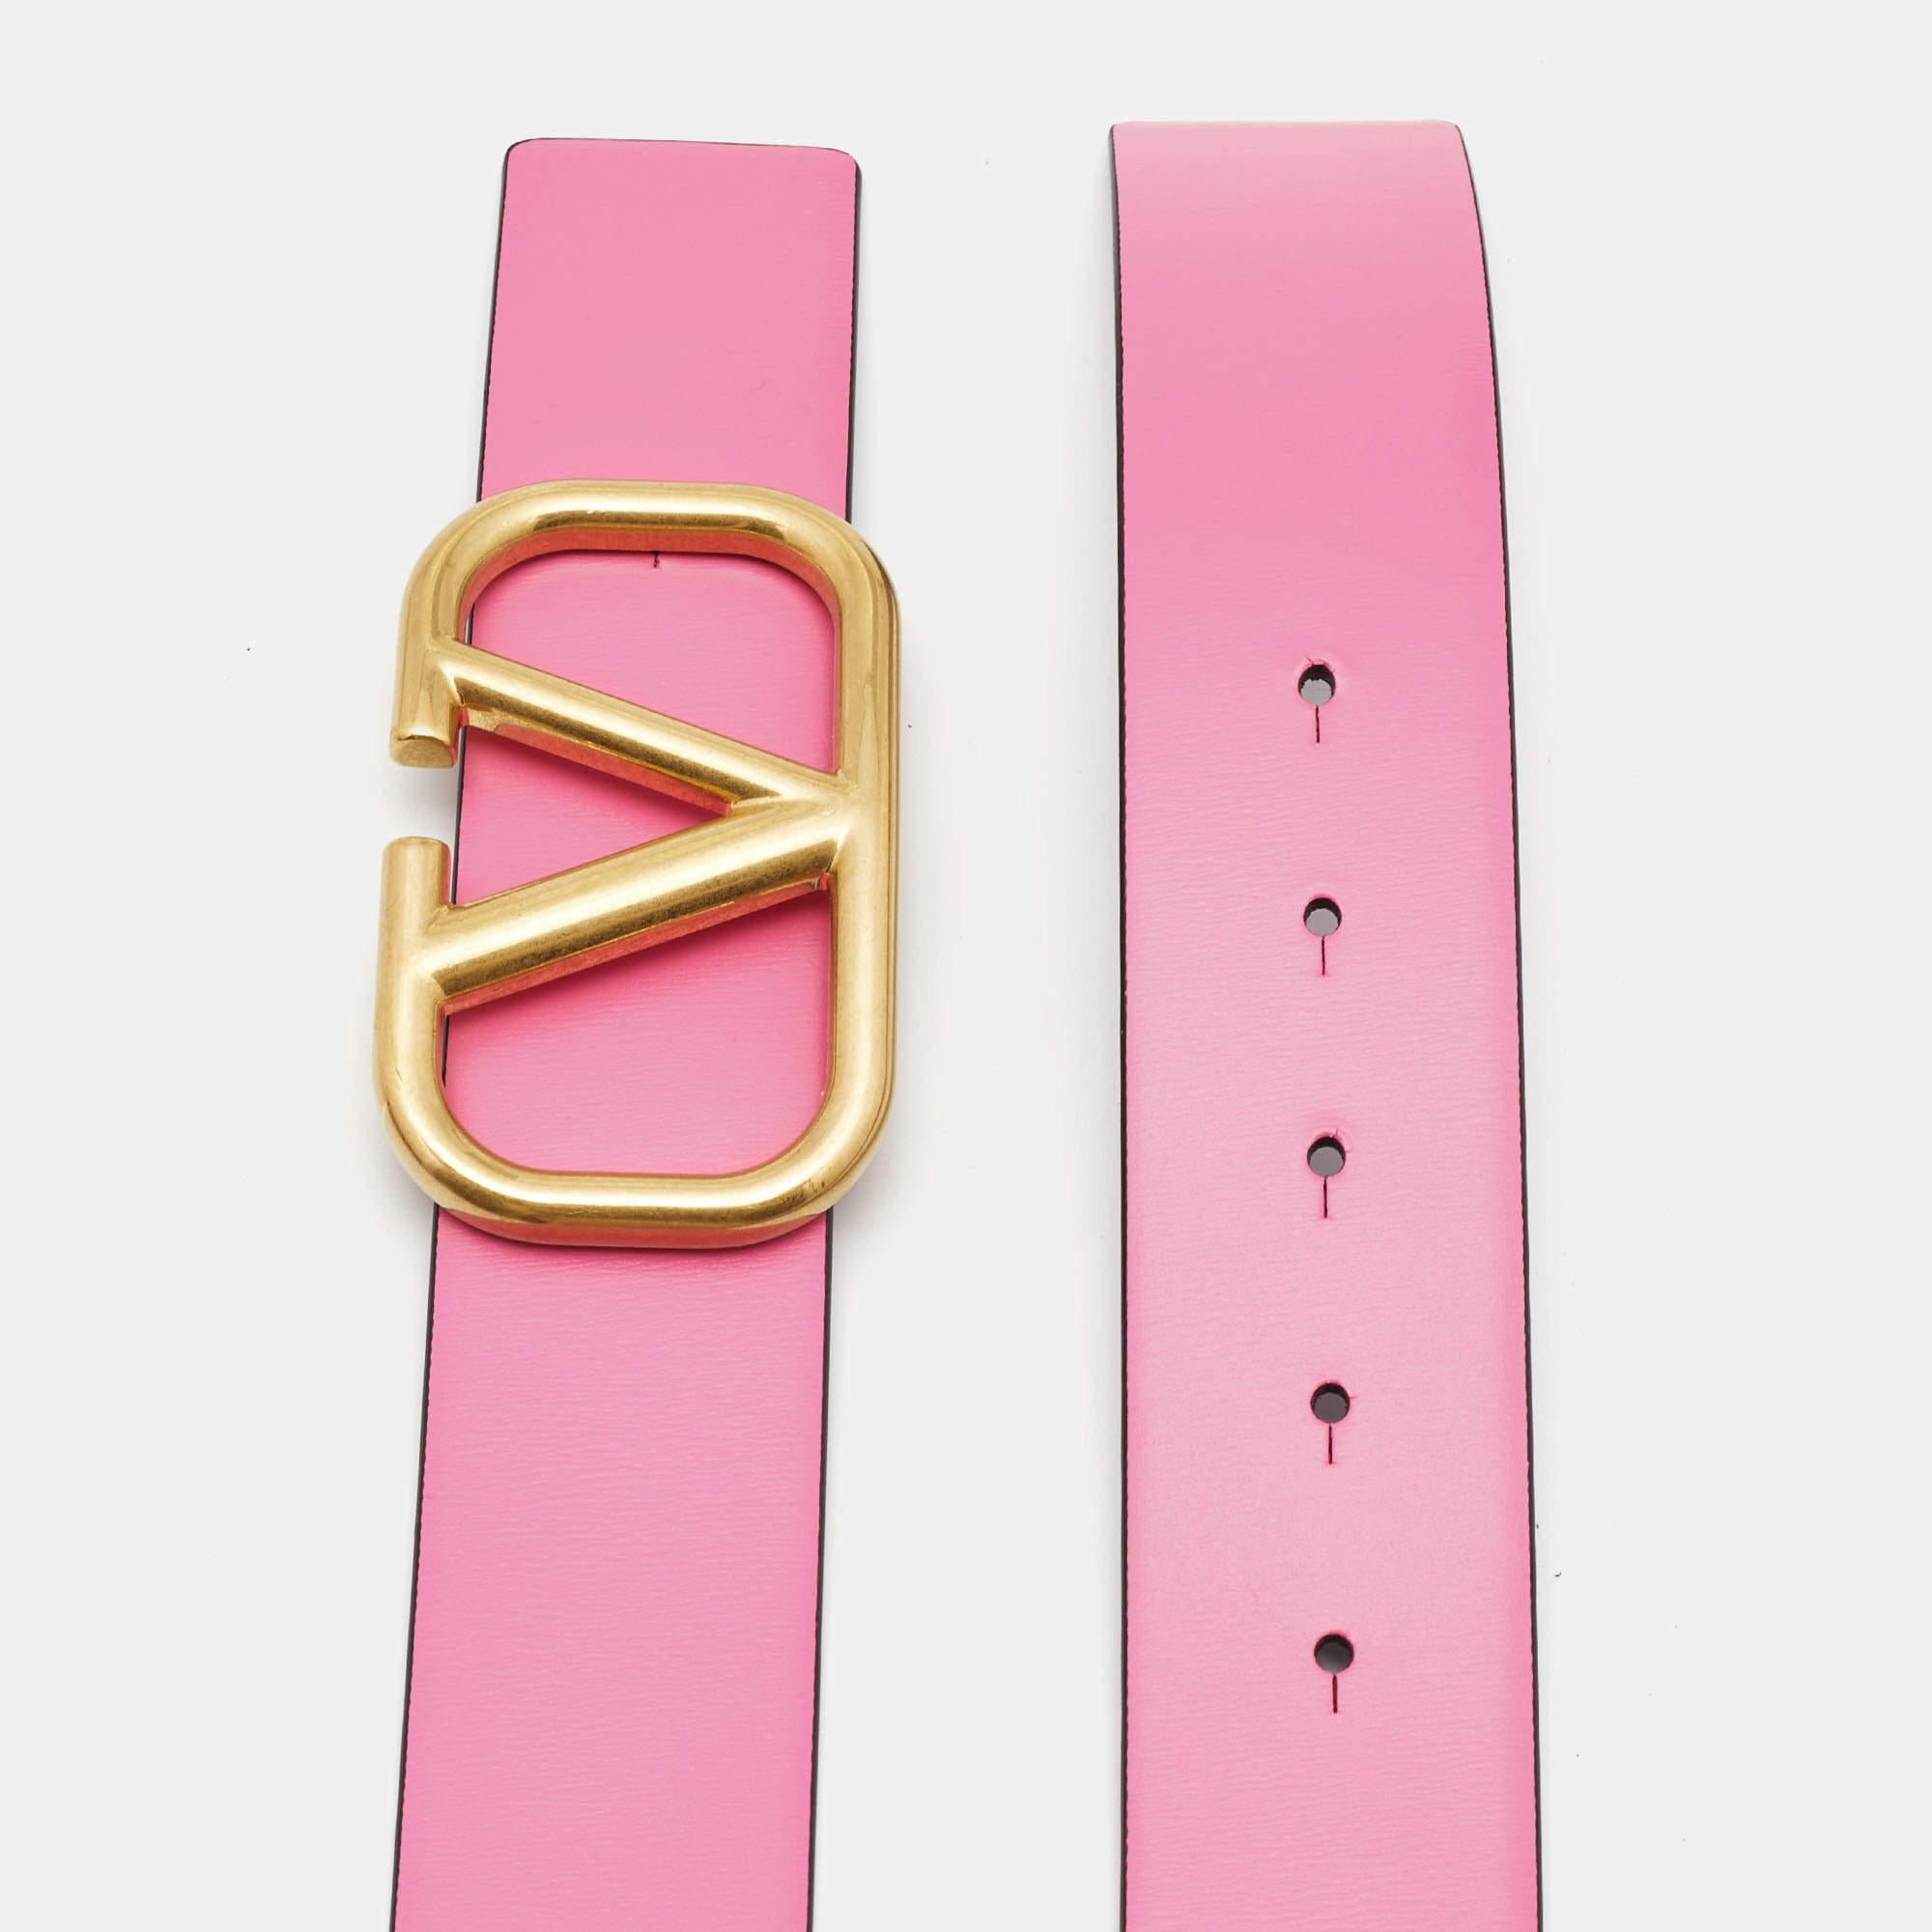 Belts are fine accessories to upgrade any basic look to a statement-making one. We particularly love this offering by Valentino. Formed using the finest materials, the belt has a well-made buckle and an impeccable finish.

Includes: Original